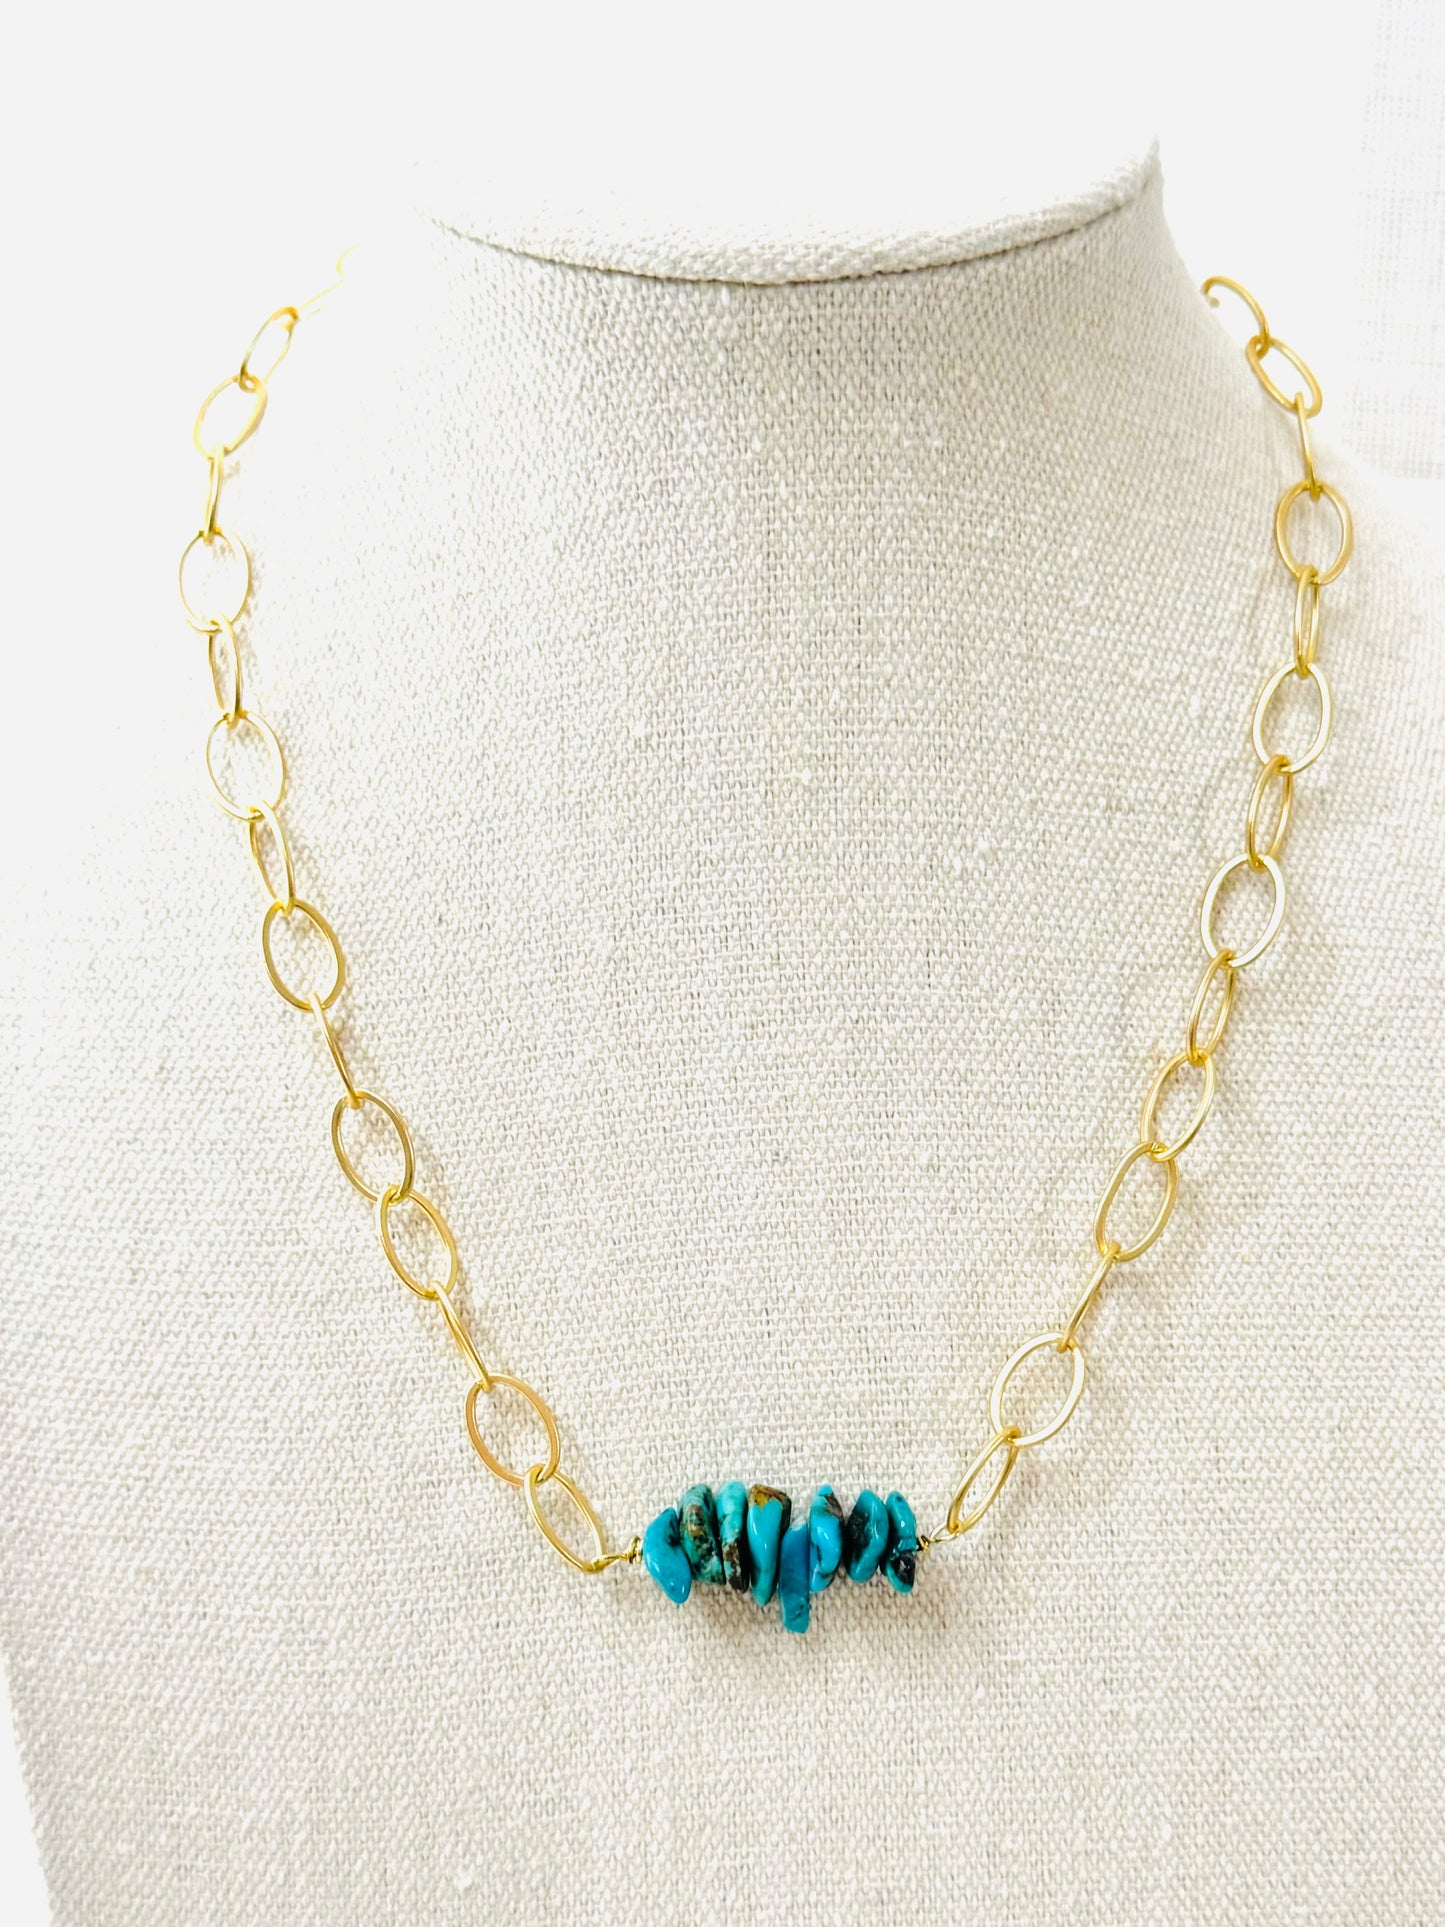 Turquoise + Matte Gold Necklace